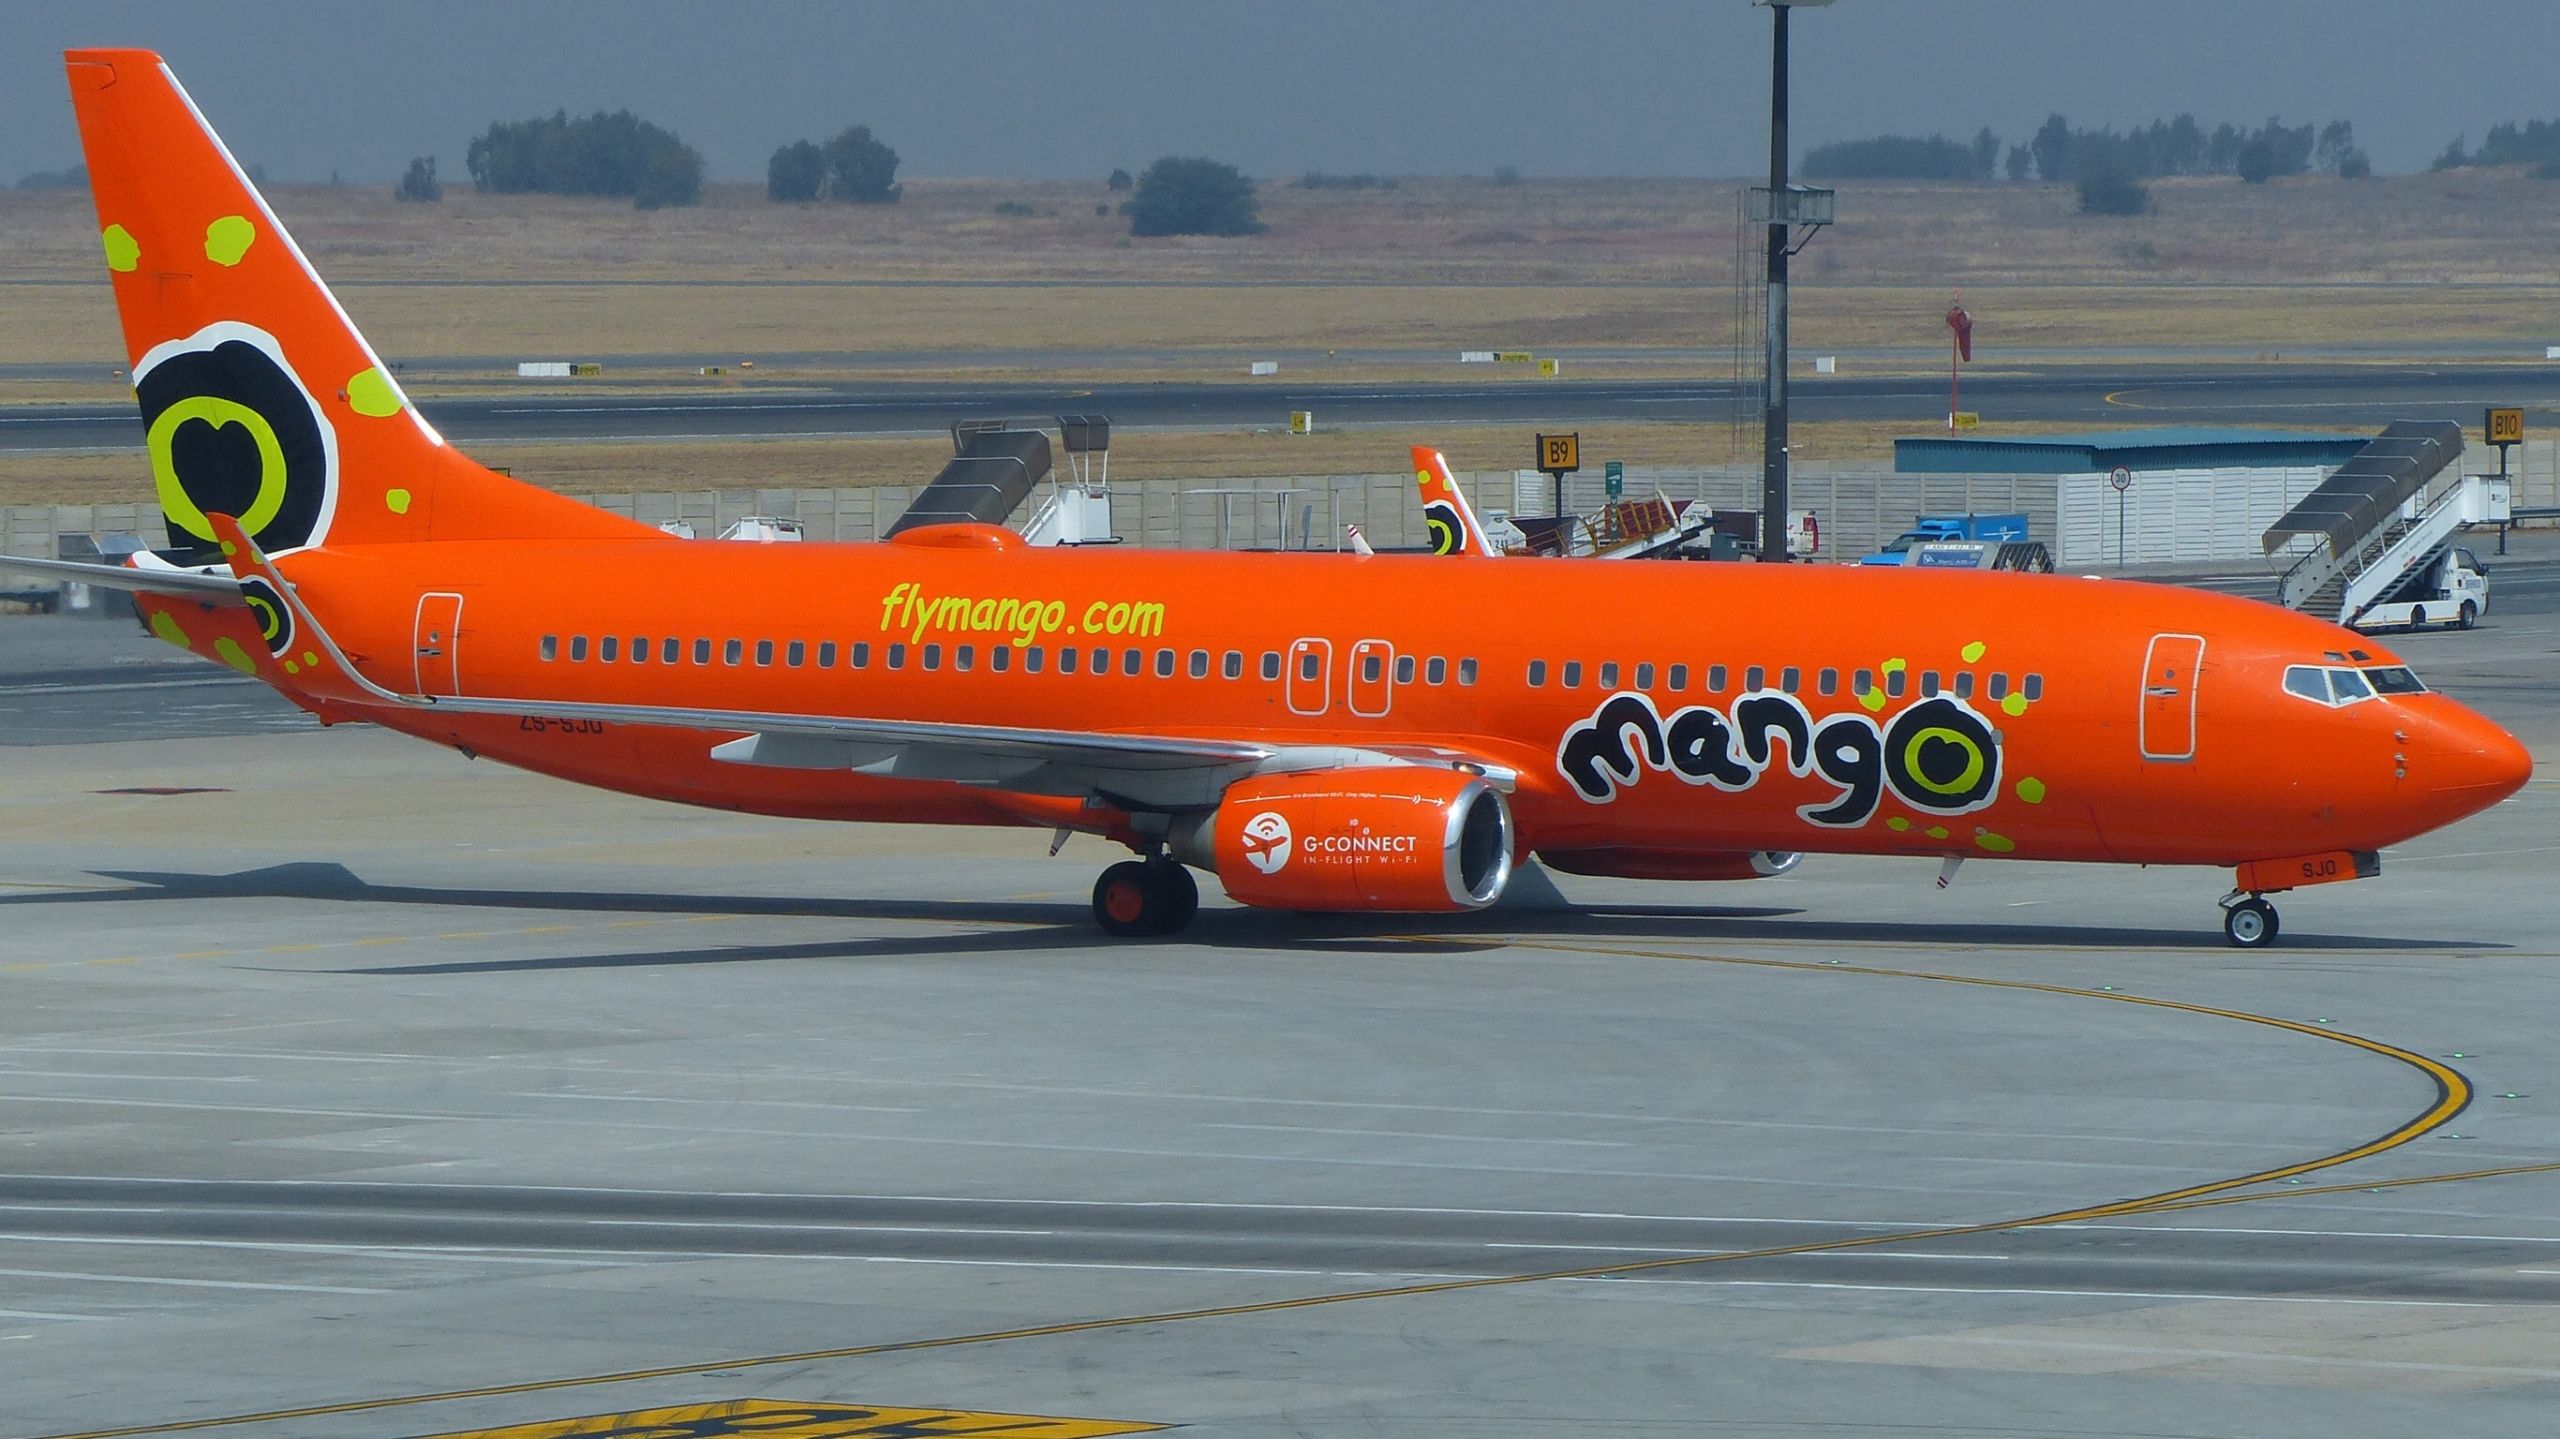 Mango Airlines Boeing 737 at the Airport